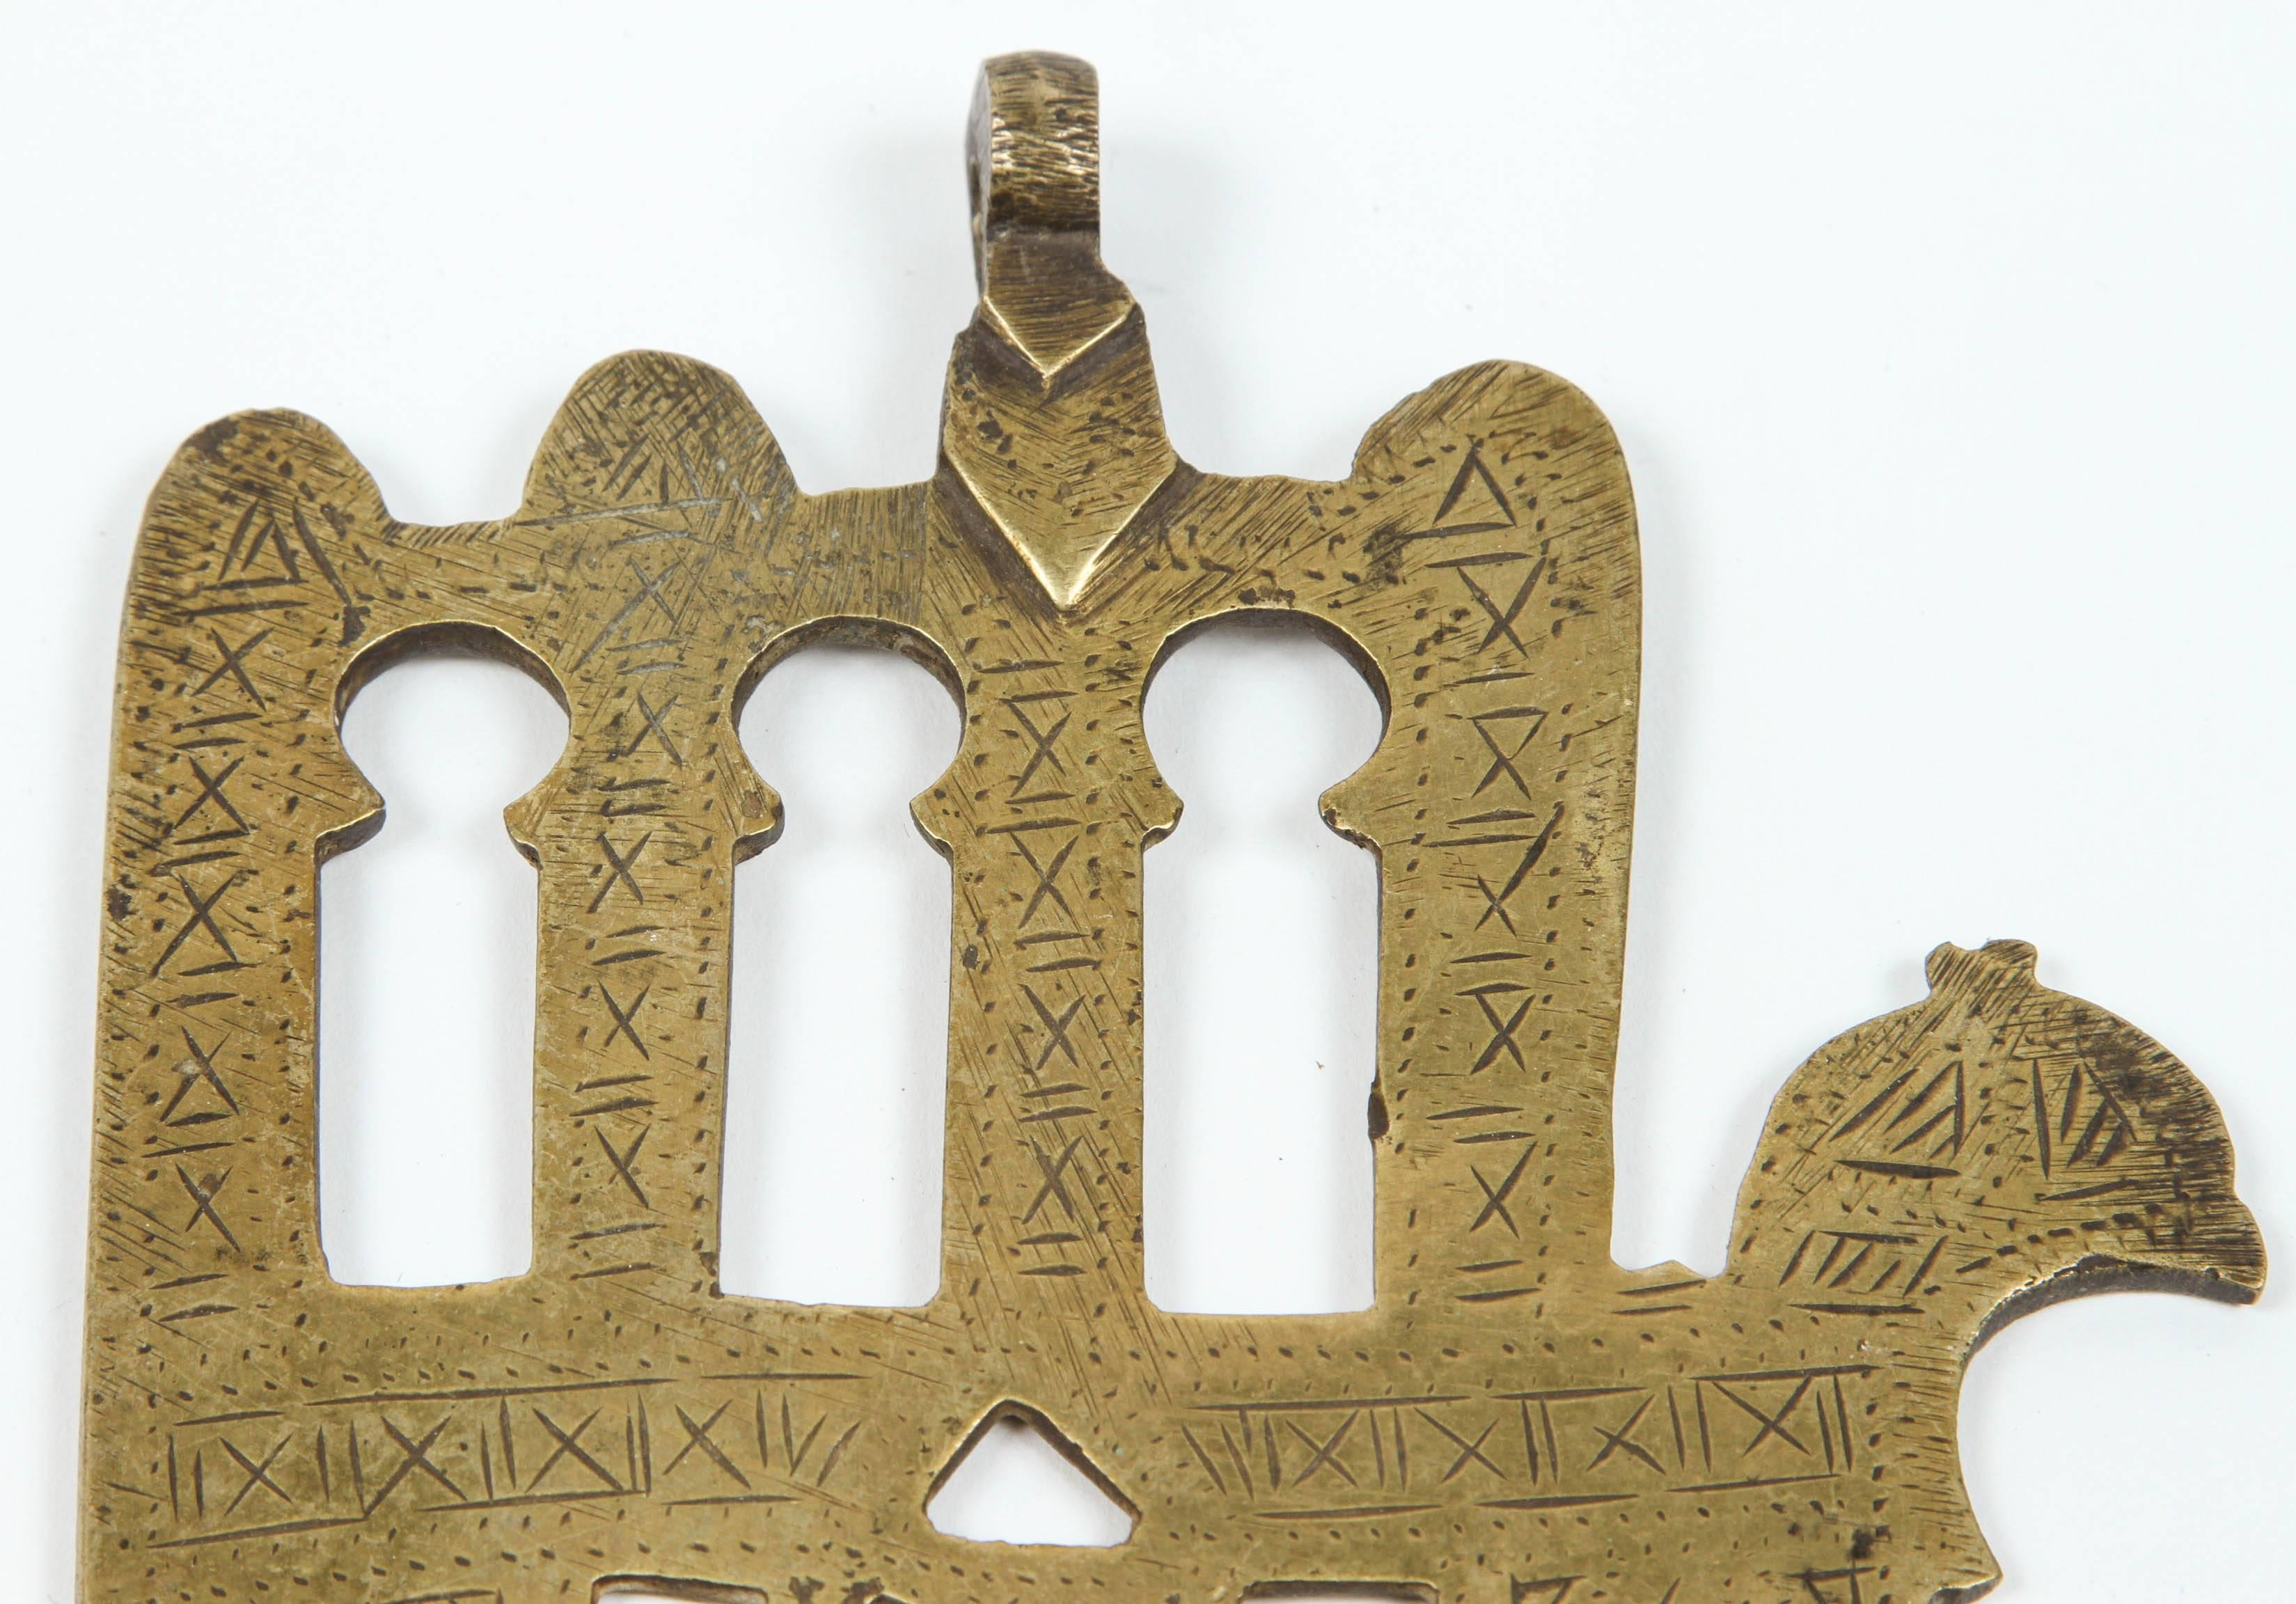 Moroccan Jewish Judaica brass khamsa. (Hand of Fatima) This beautiful piece of folk brass art originates from Morocco, North Africa. The Judaica khamsa is a rare version - with only one finger spread out - rather than two as it is with the most ones